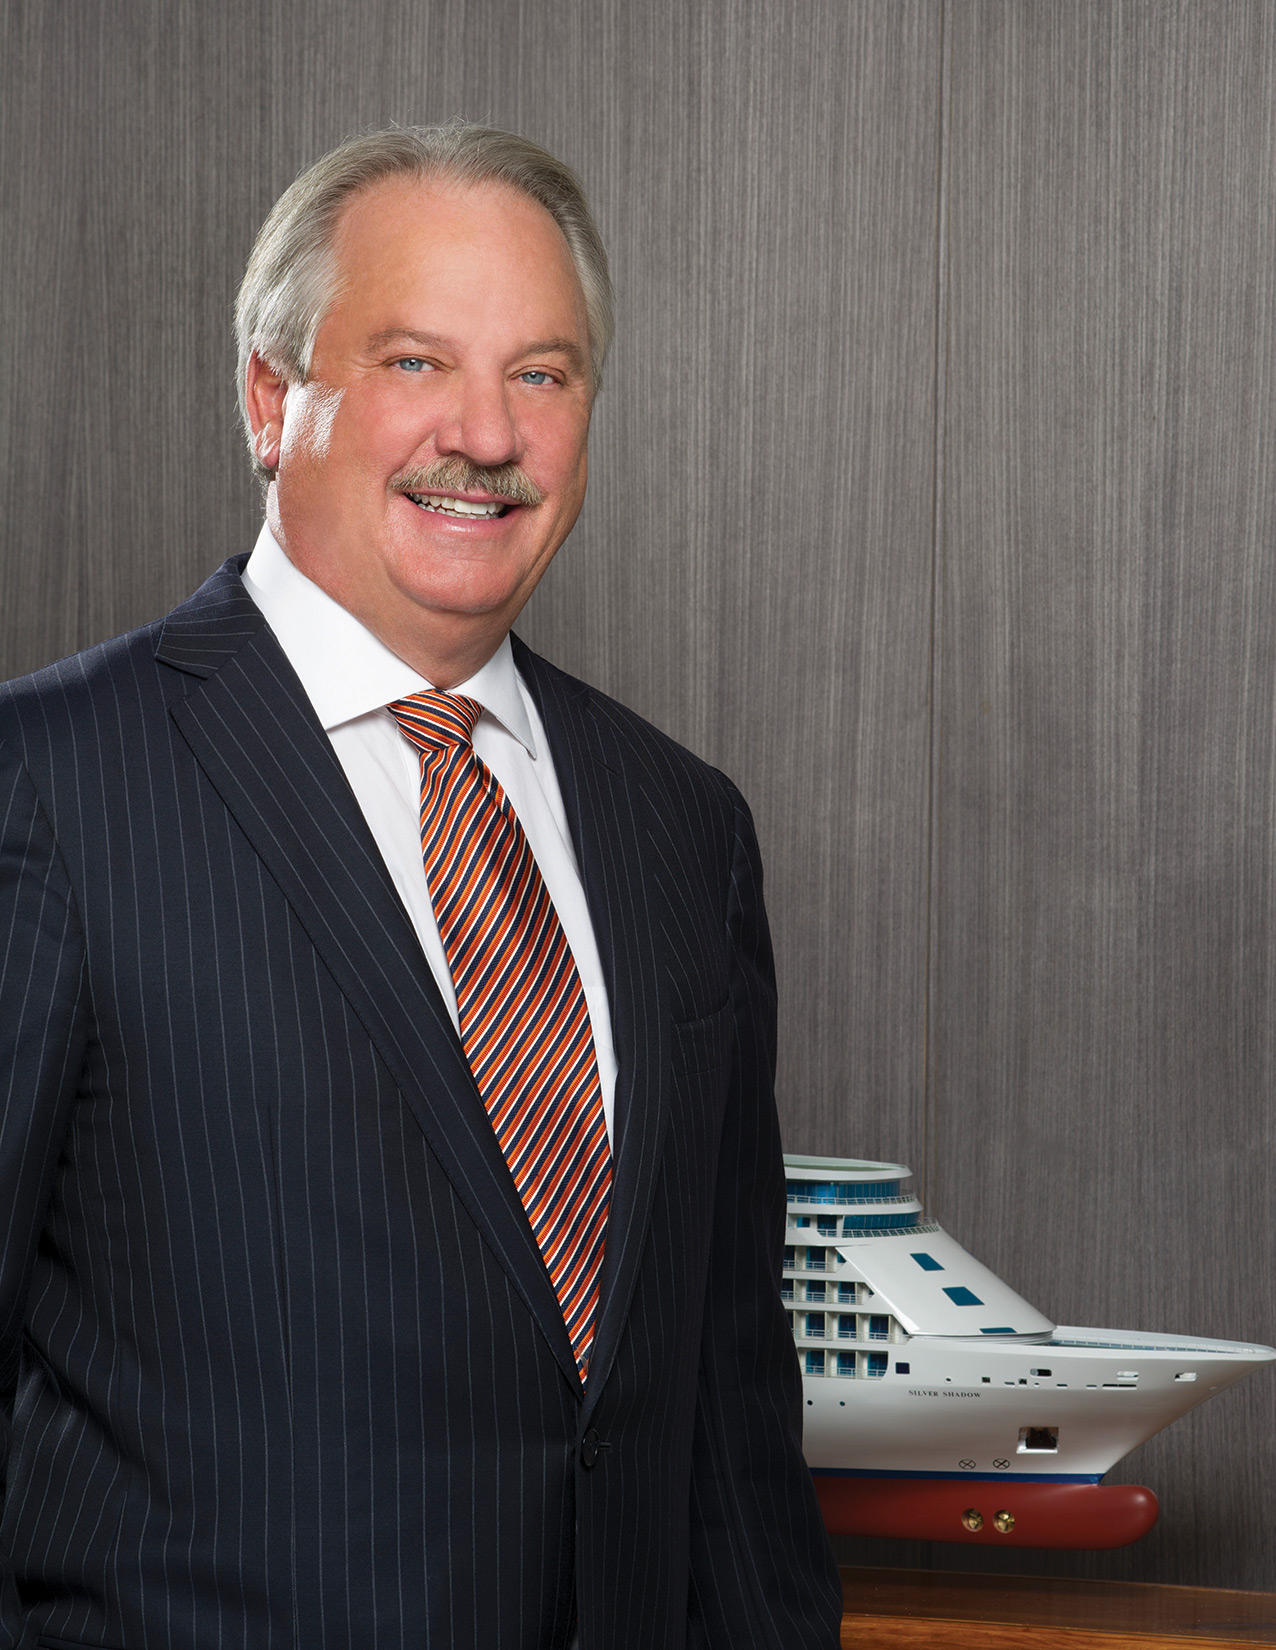 Mark Conroy, Managing Director for the Americas, Silverseas Cruise Lines